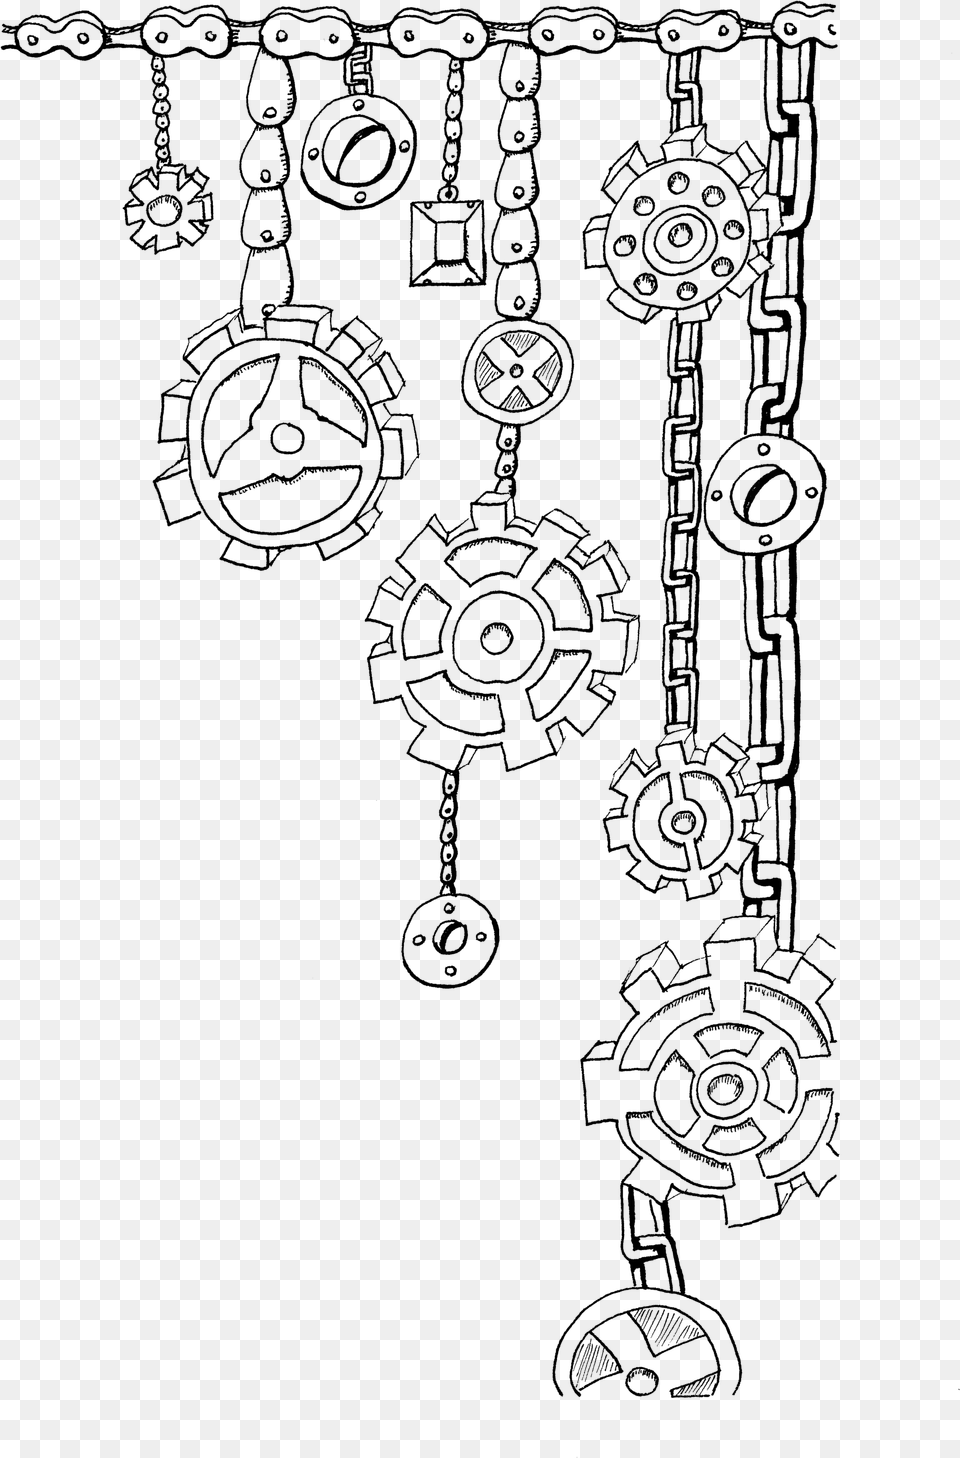 Charming Purplepoppet Clear Steampunk Gears And Cogs Drawing, Gray Png Image